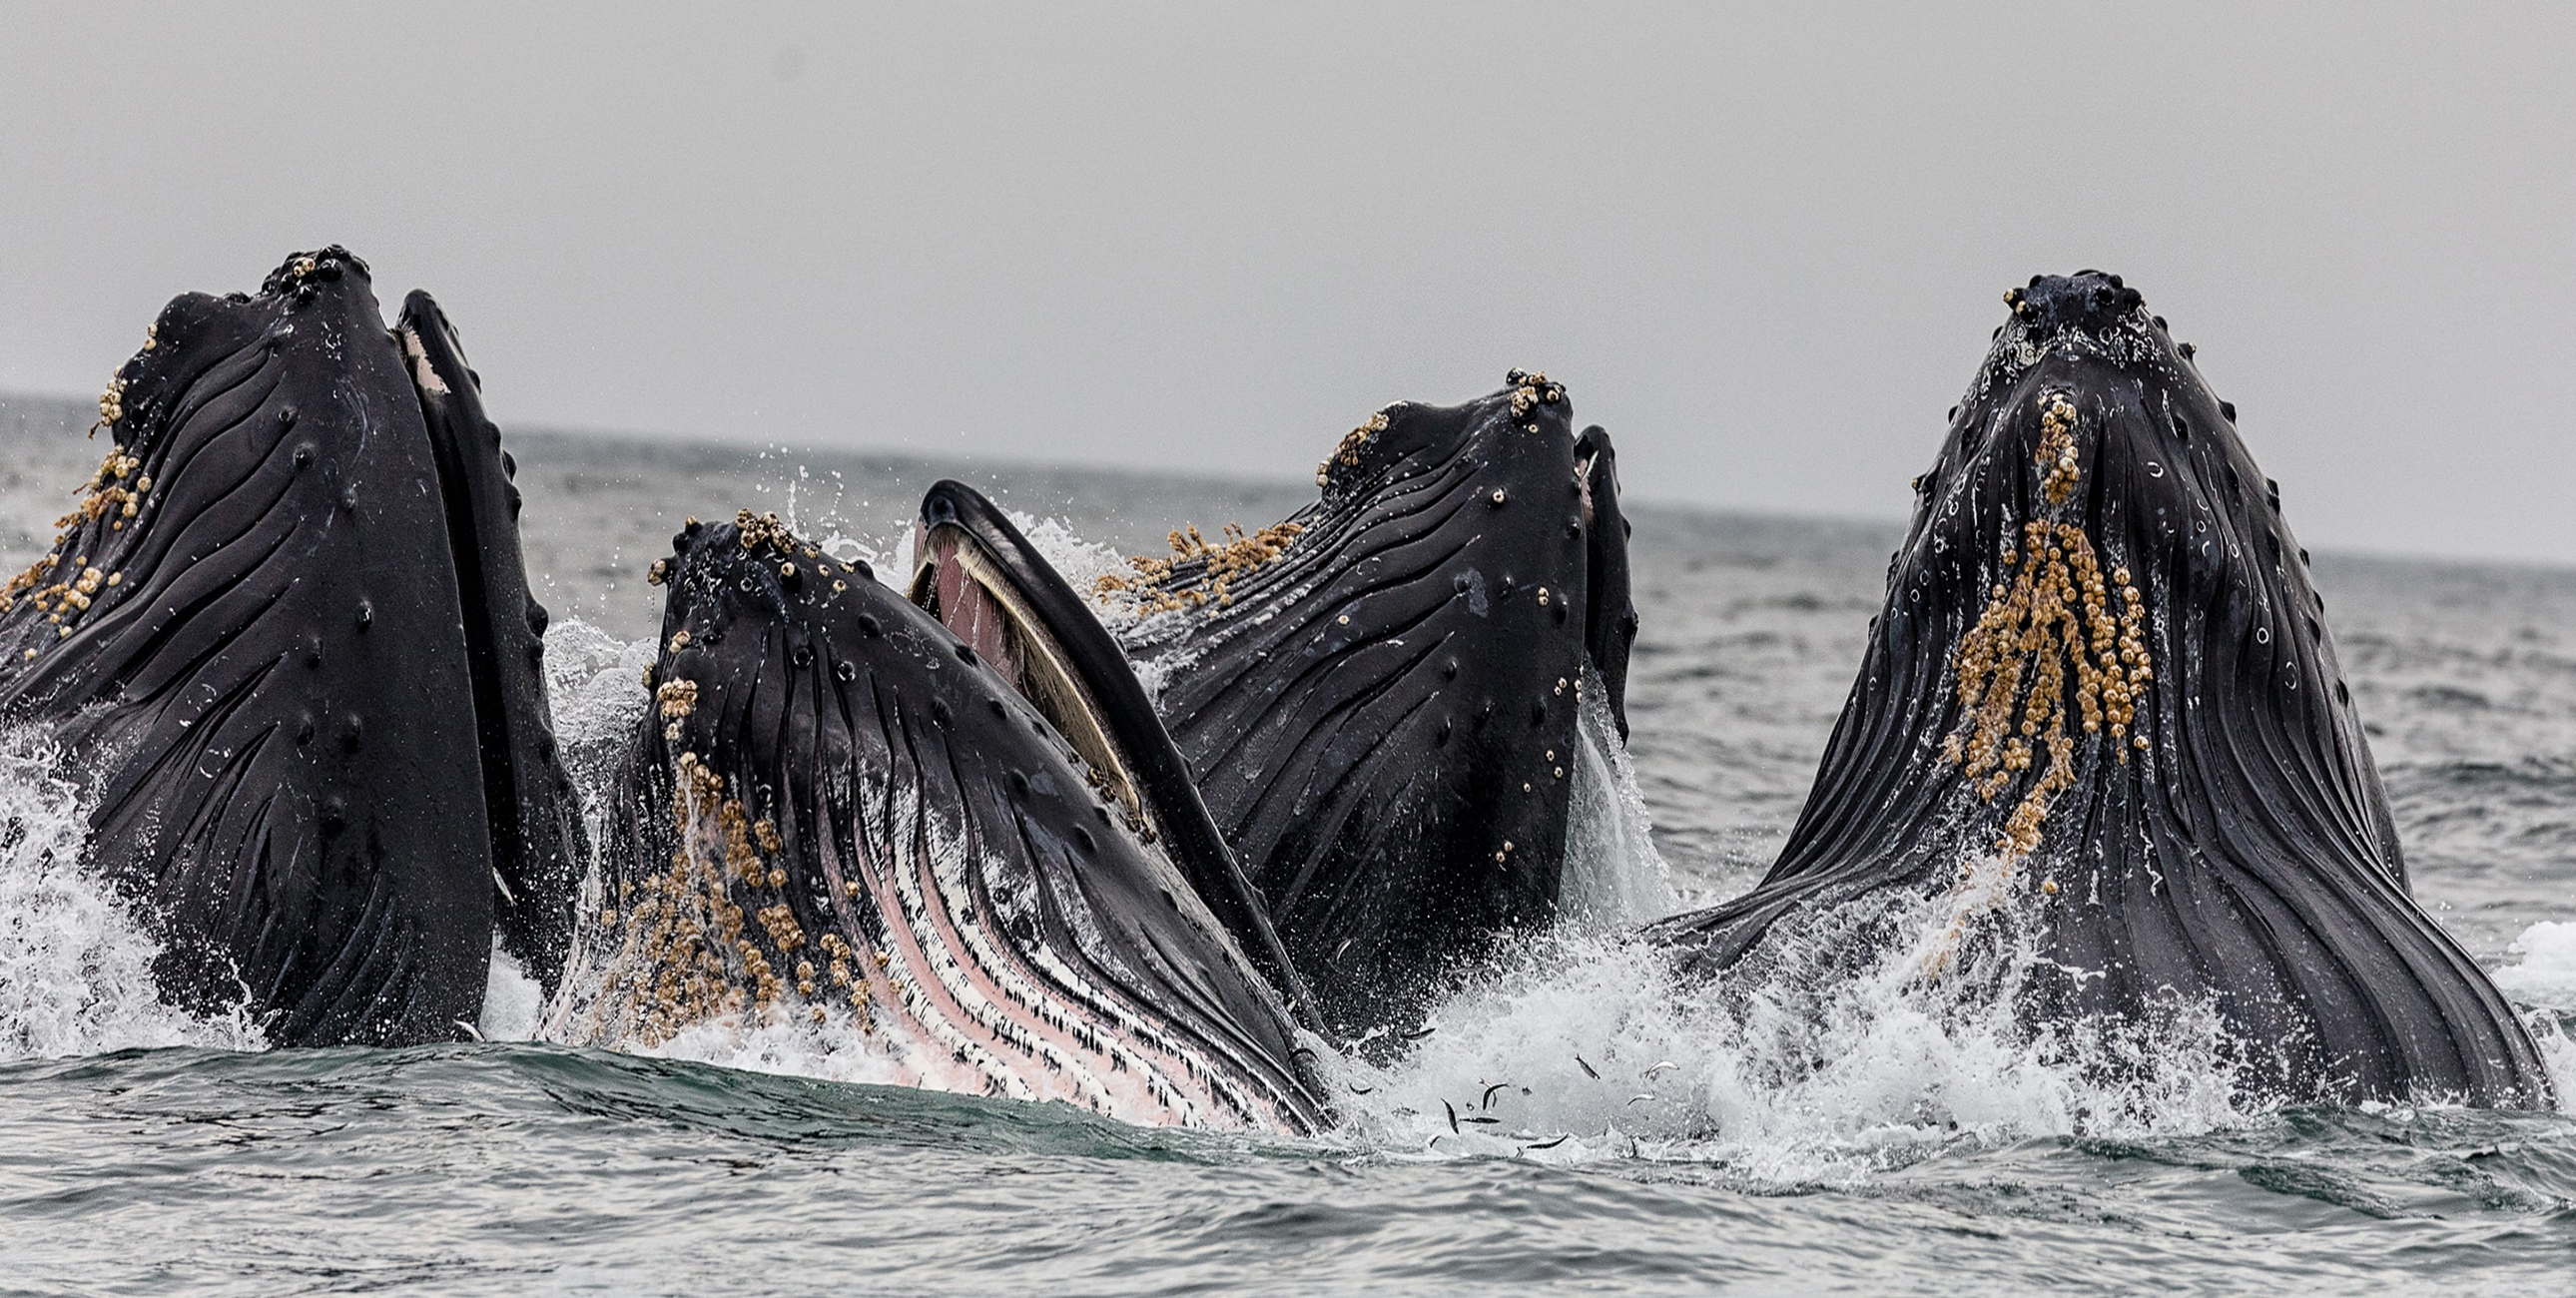 Whales breaching the water together. 